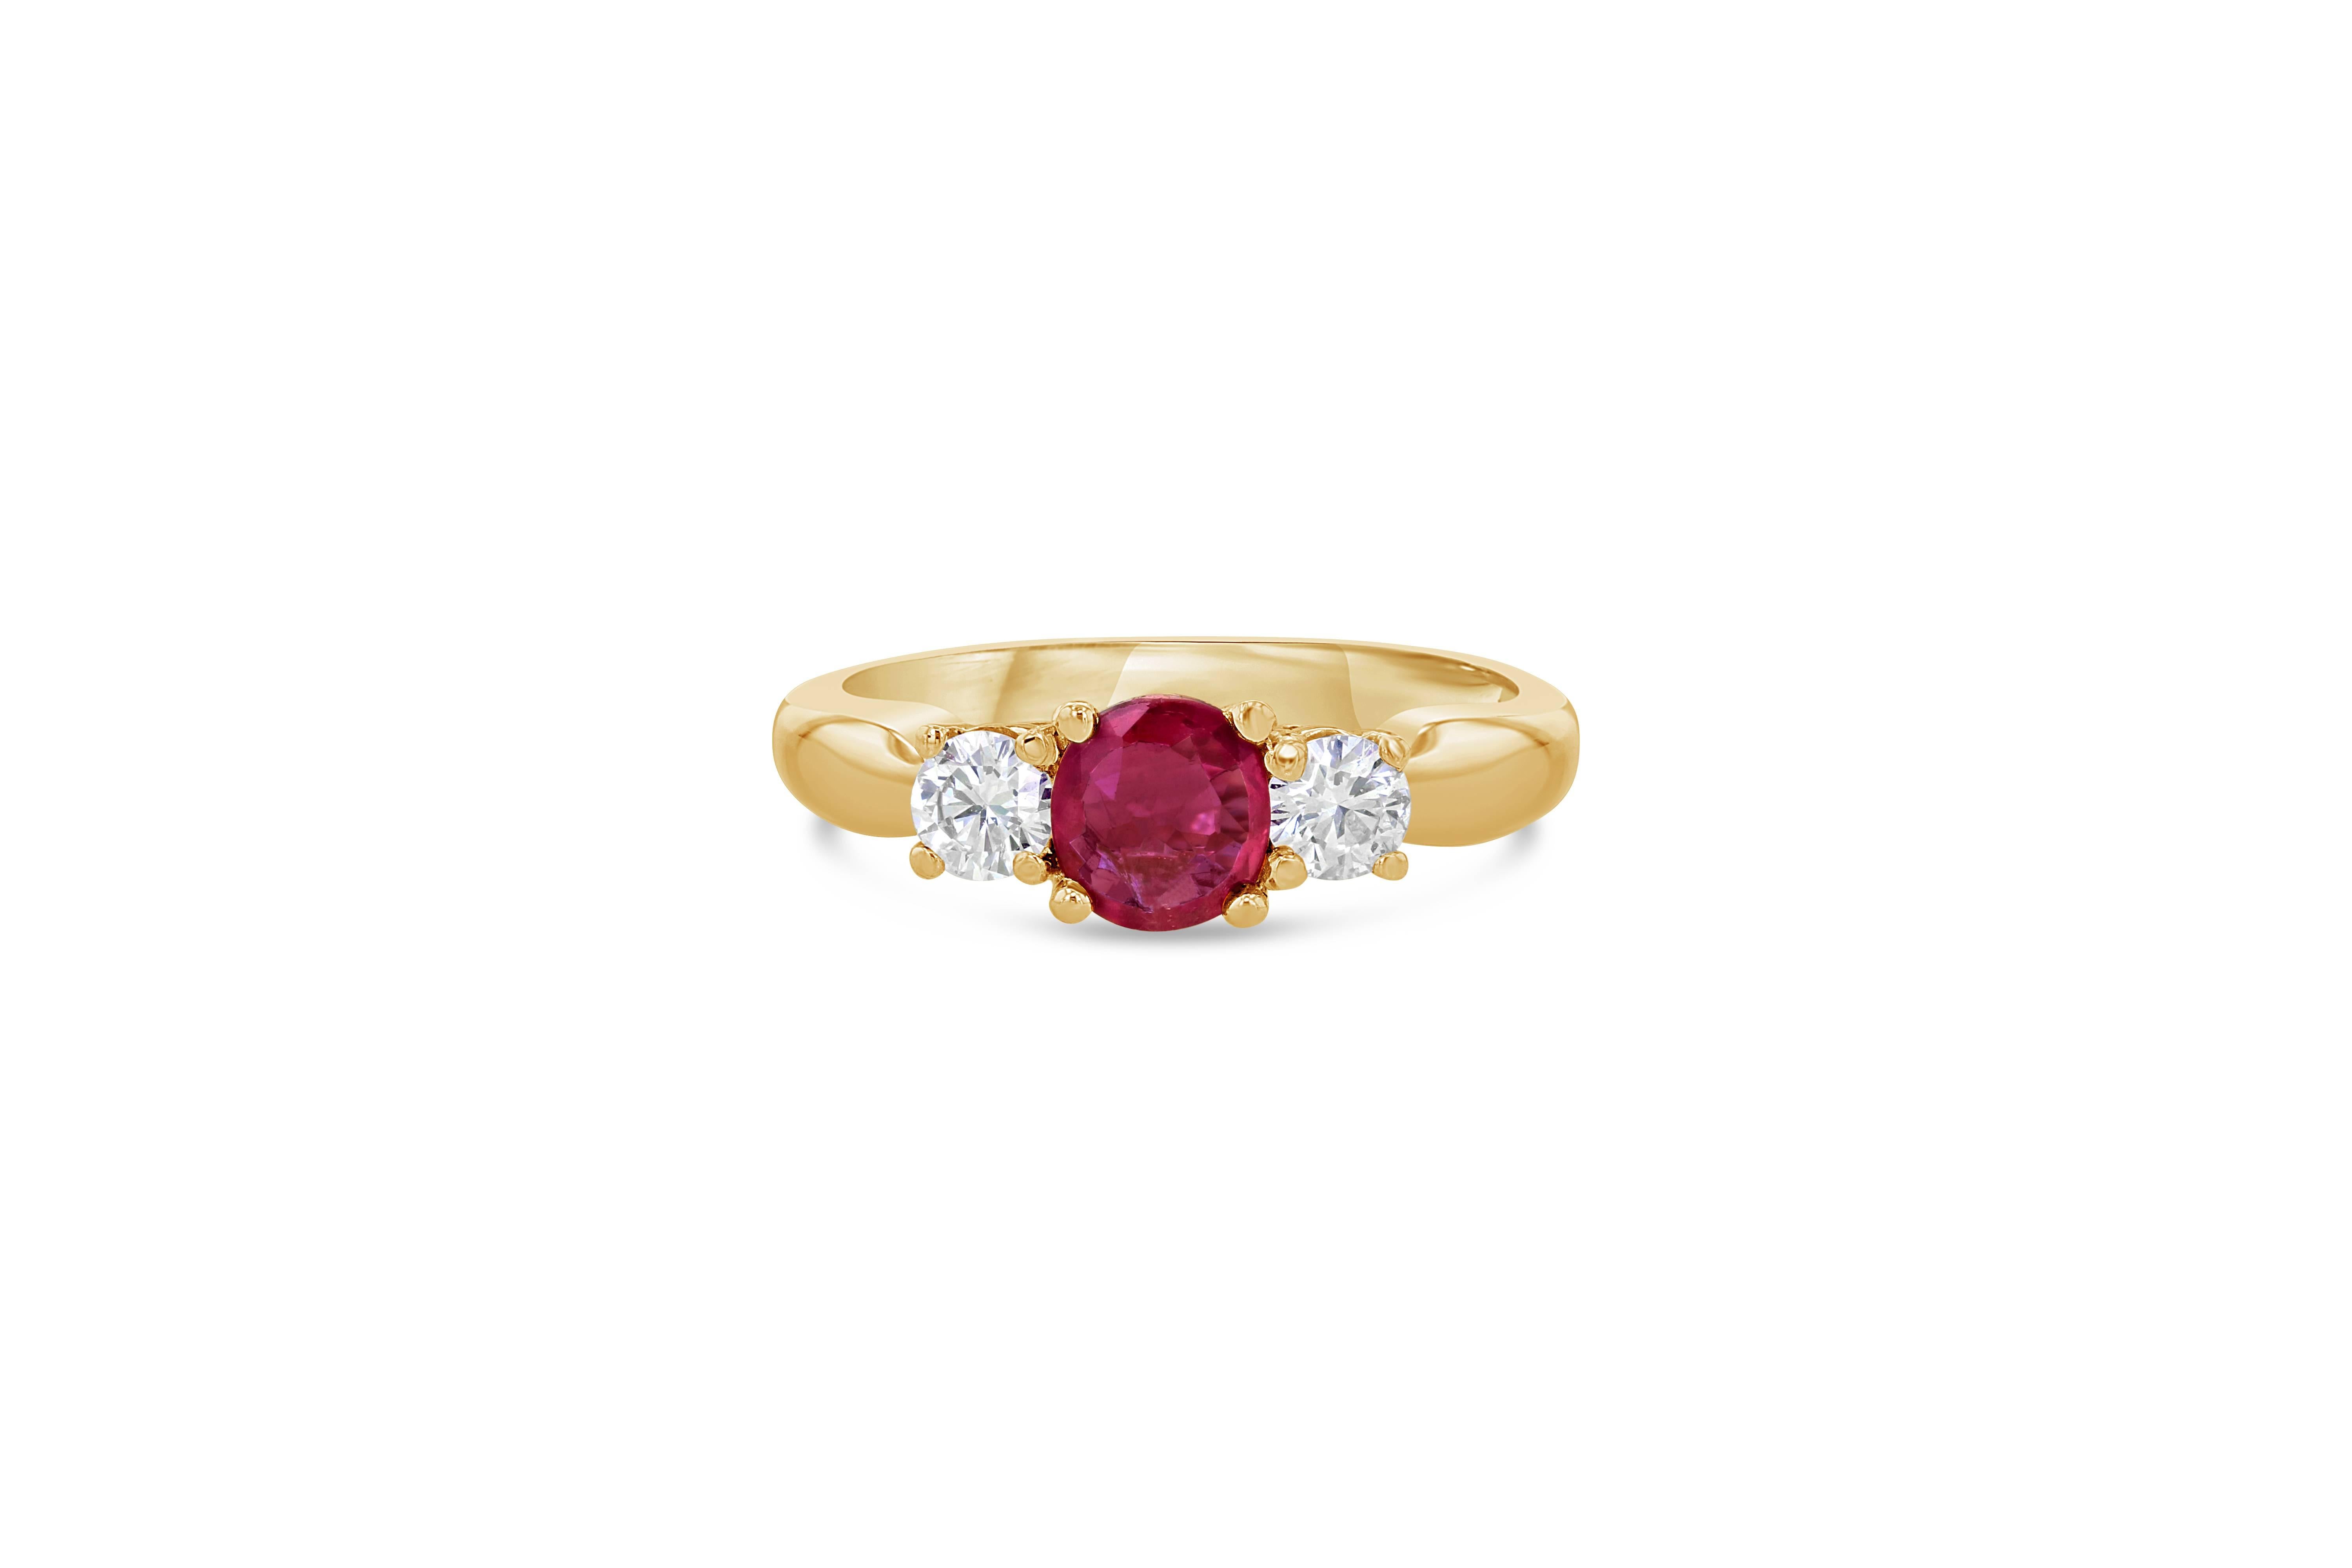 This classic 3 Stone Ring represents the past, present and future of a relationship with a Ruby as its center stone. The origin of the Ruby is Burmese and is 0.68 Carats; the 2 Round Cut Diamonds weigh 0.40 Carats with a clarity and color of SI-F.